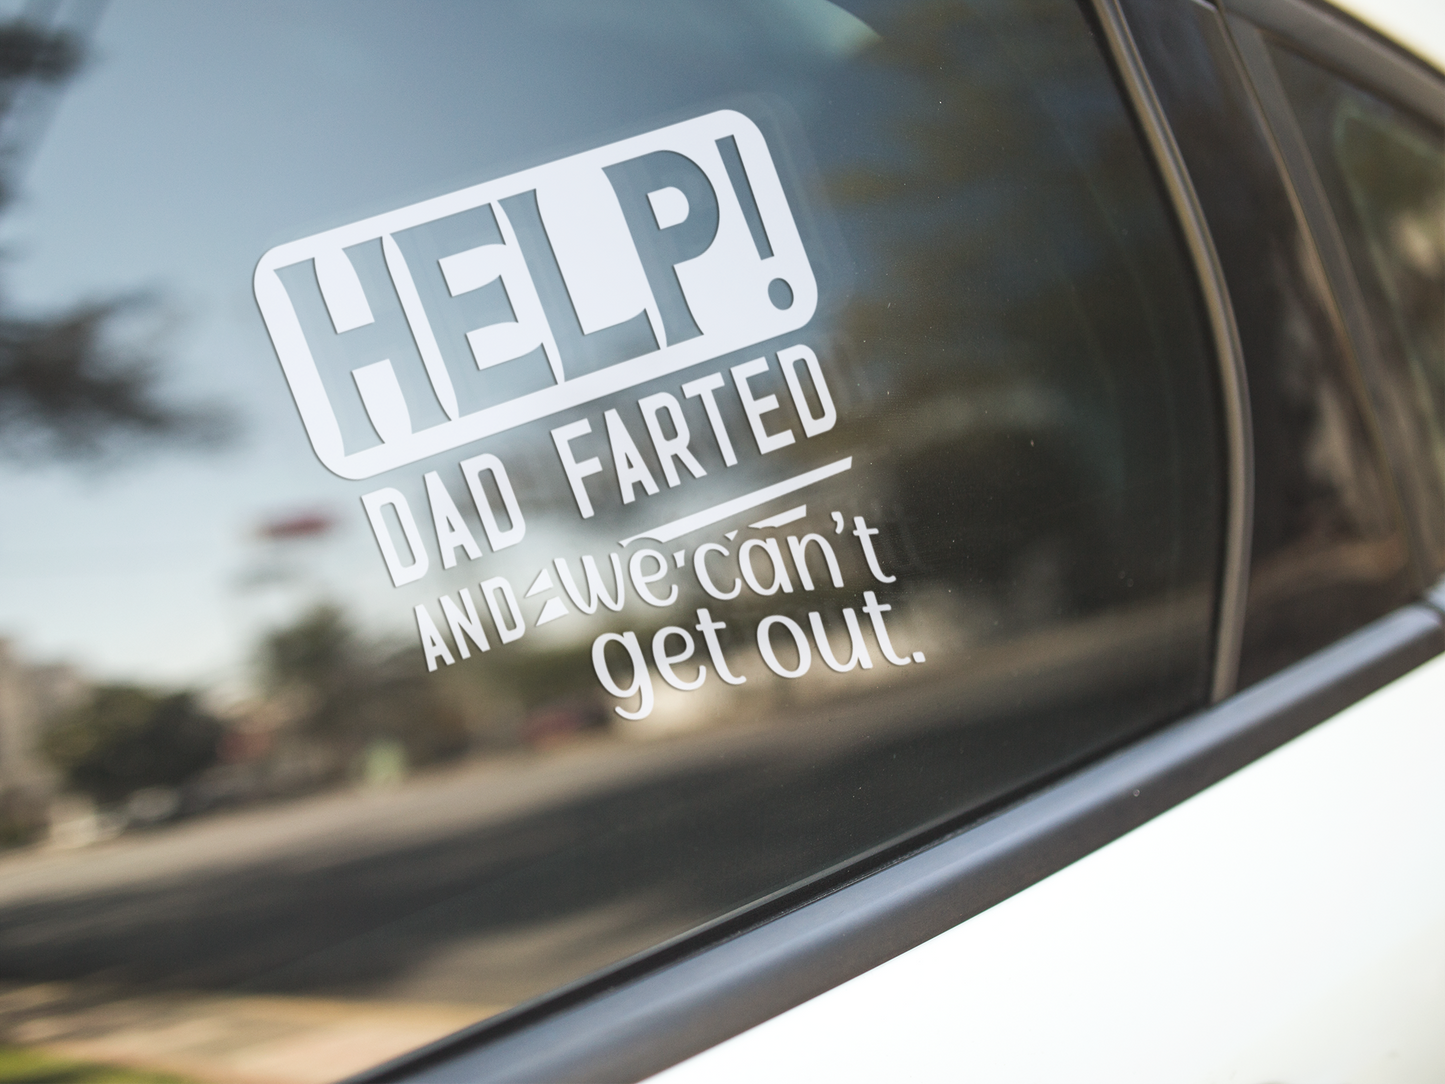 help dad farted and we cant get out car window decal